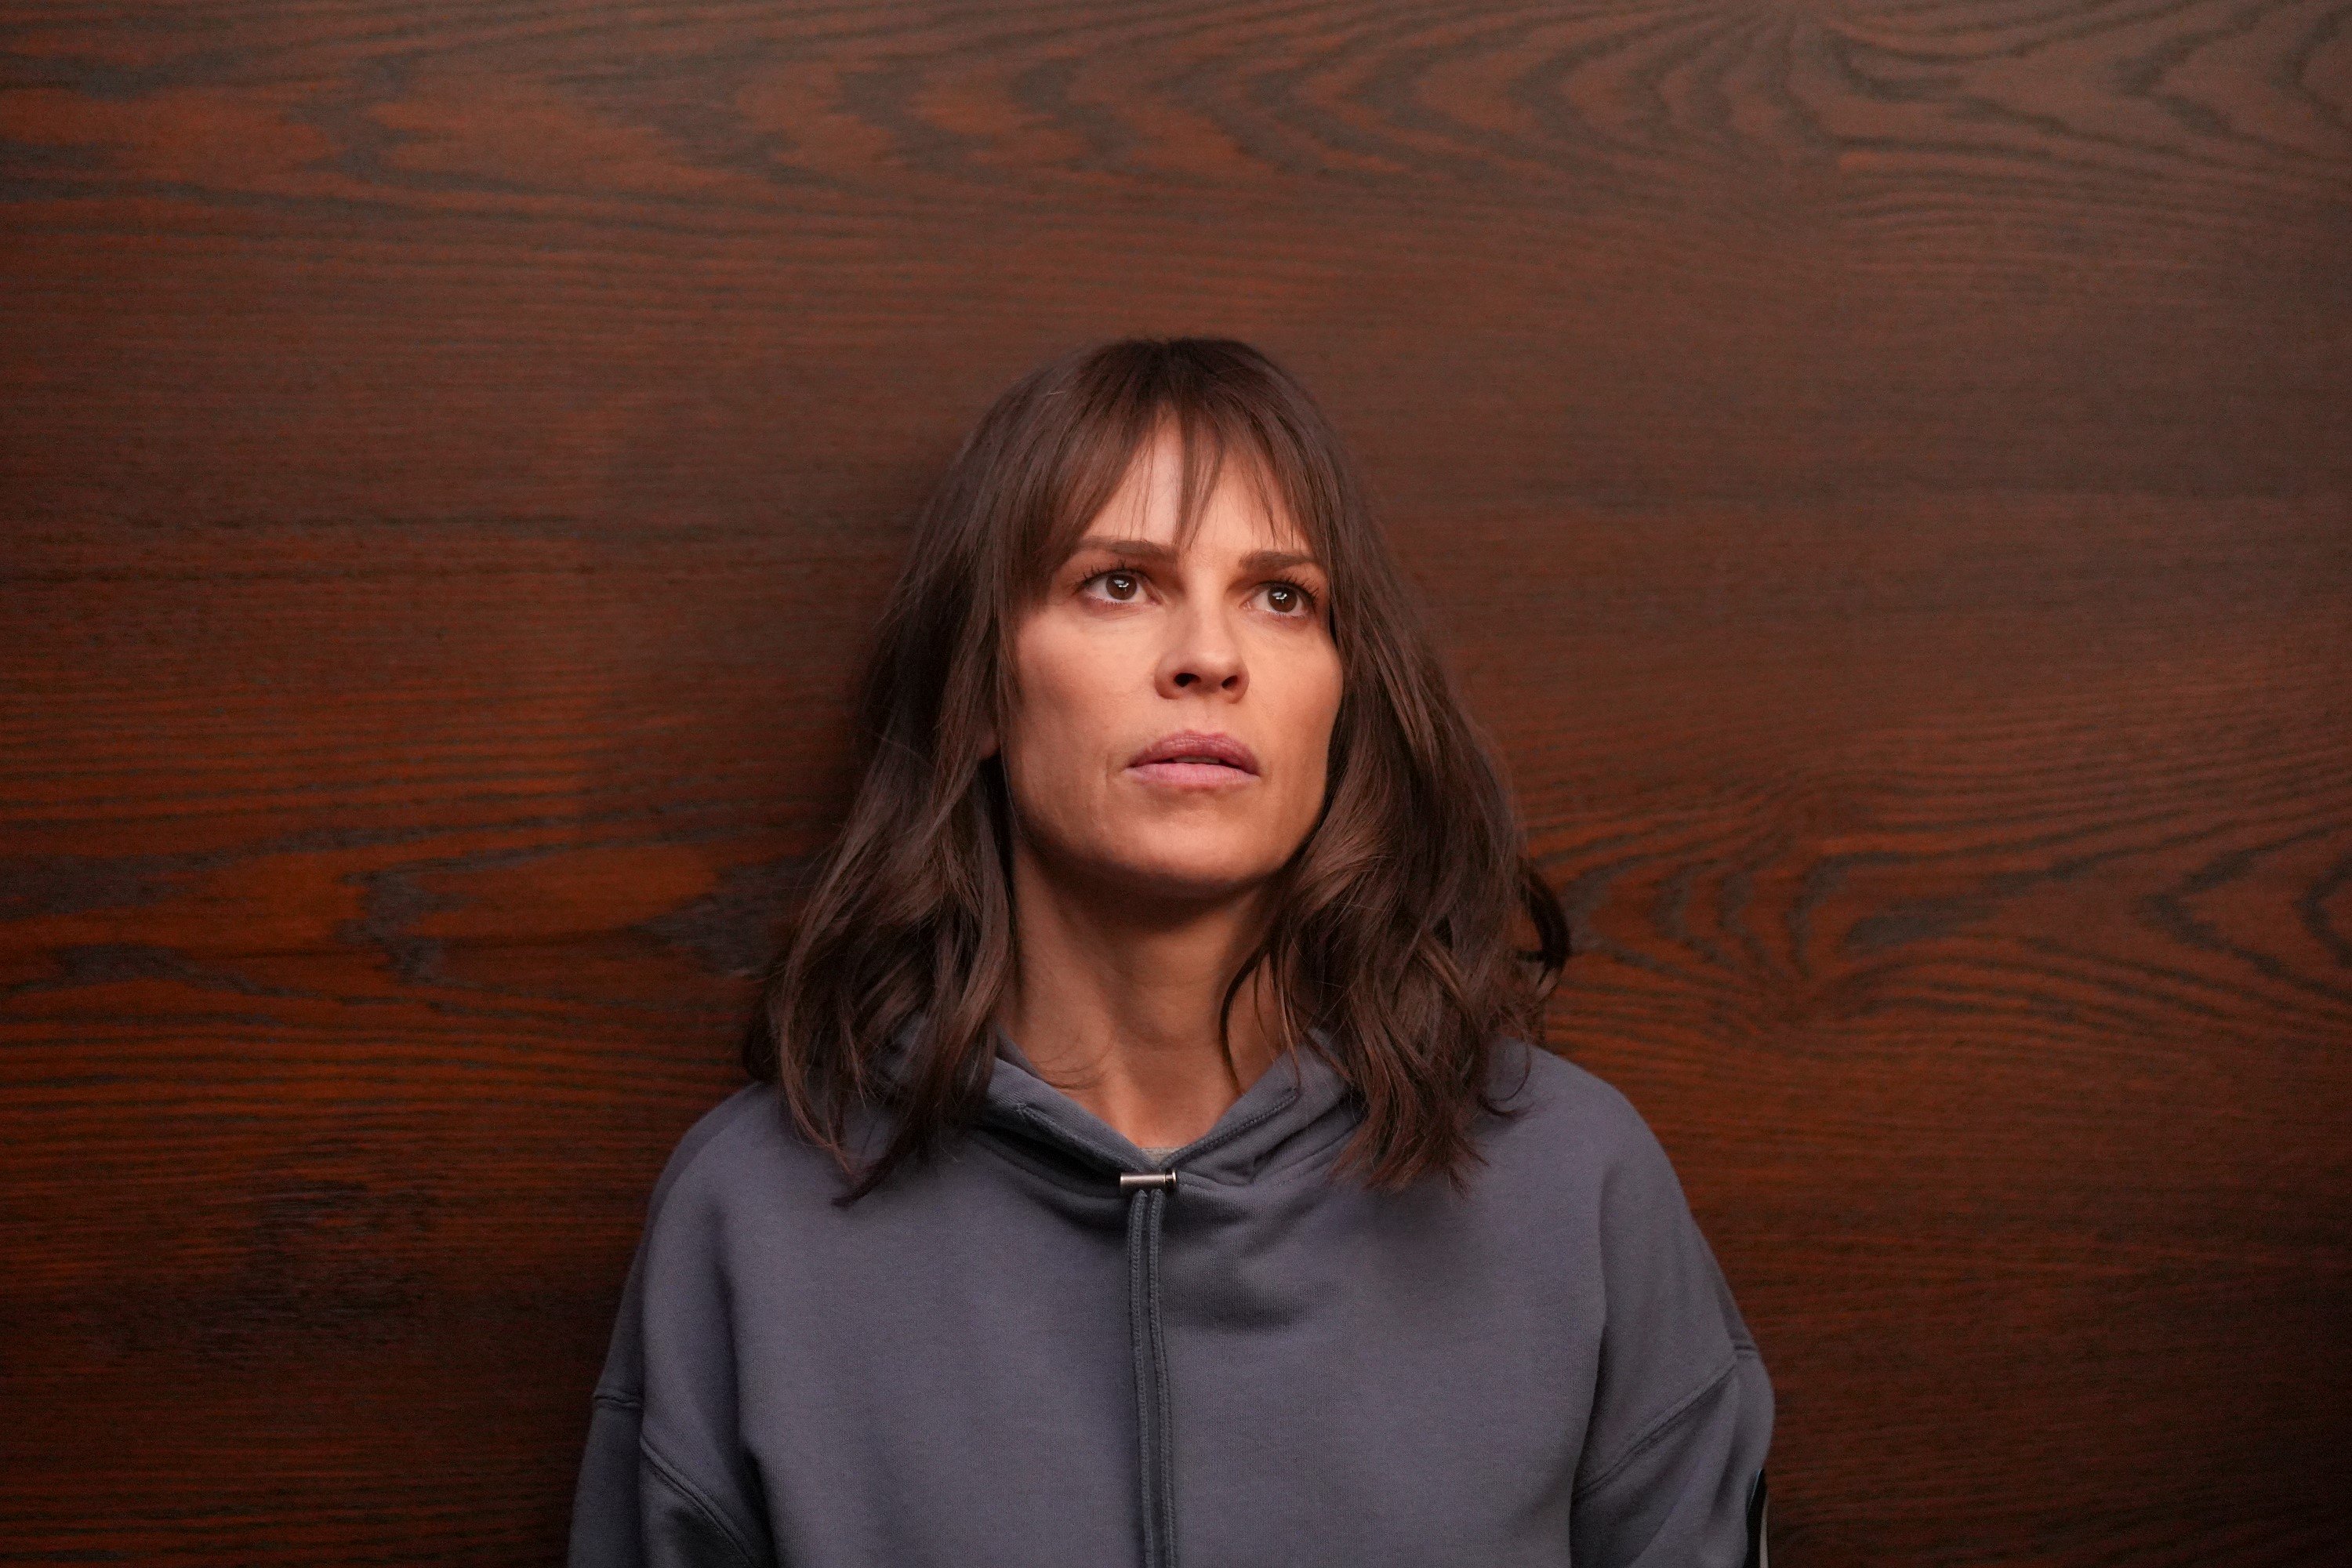 Hilary Swank, in character as Eileen Fitzgerald in 'Alaska Daily' on ABC, wears a light gray hoodie. In 'Alaska Daily,' the Concerned Citizen is threatening Eileen.